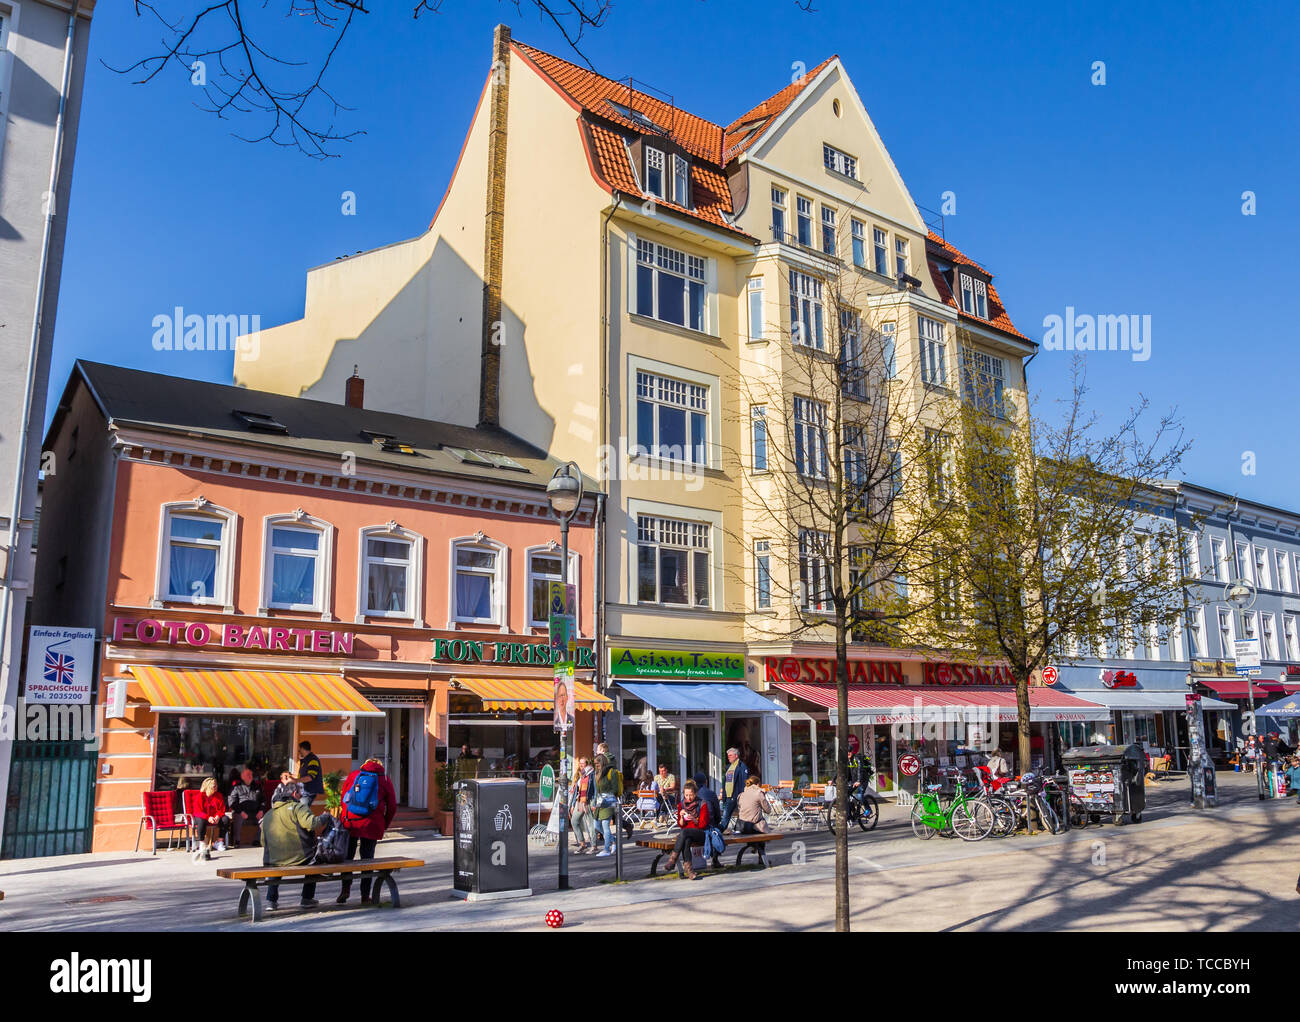 Colorful shoppng street at the Brink square of Rostock, Germany Stock Photo